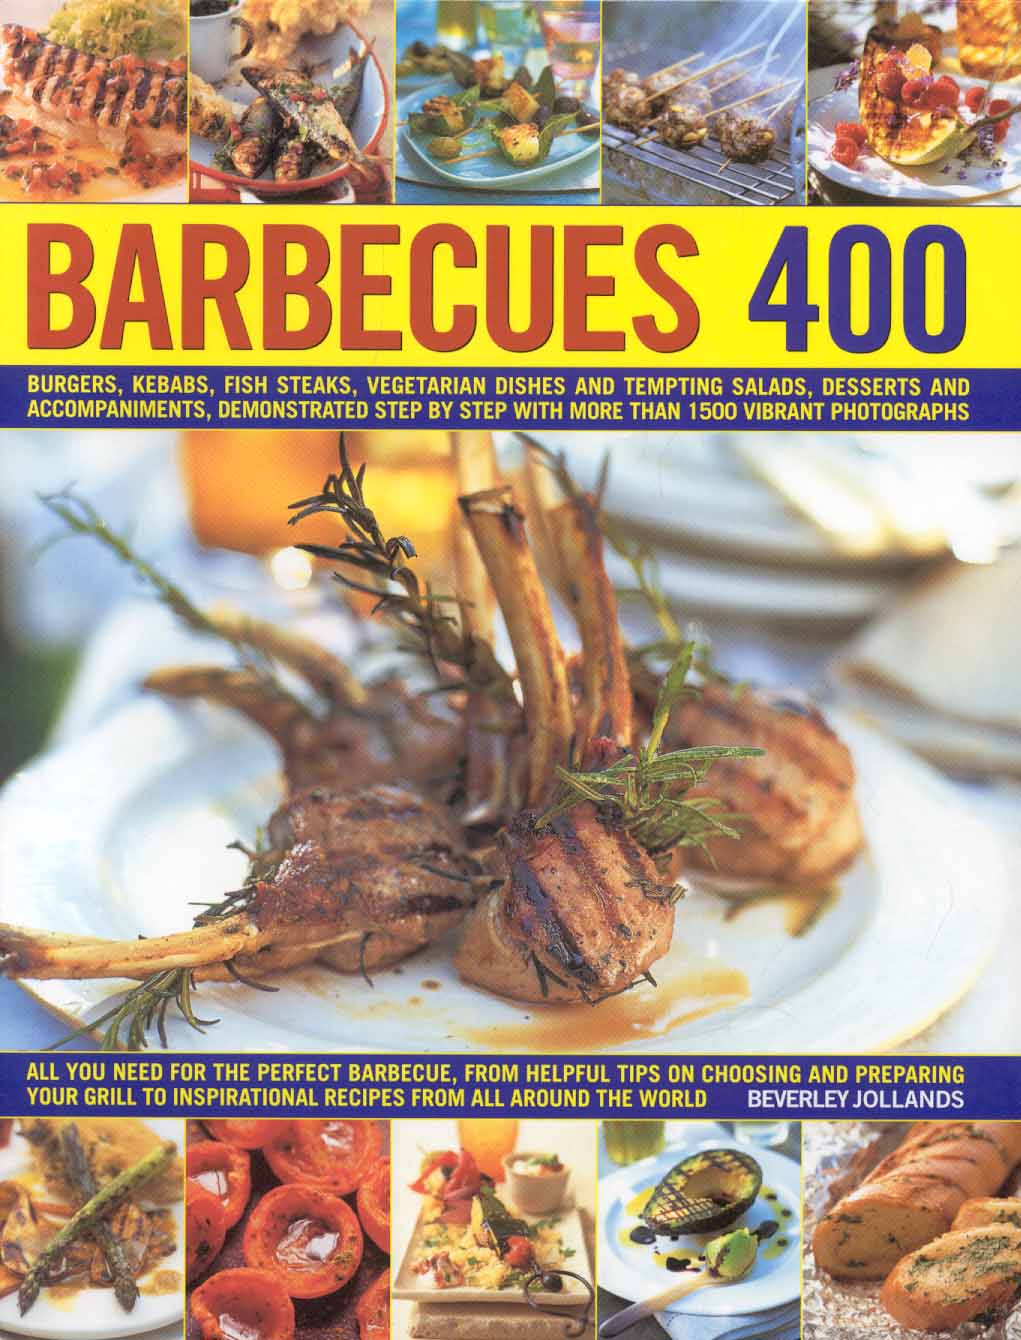 400 Barbecues : Sizzling summer recipes for barbecues, grills, griddles, marinades, rubs, sauces and side dishes, with more than 1500 step-by-step stunning photographs (Hardcover) - image 1 of 1